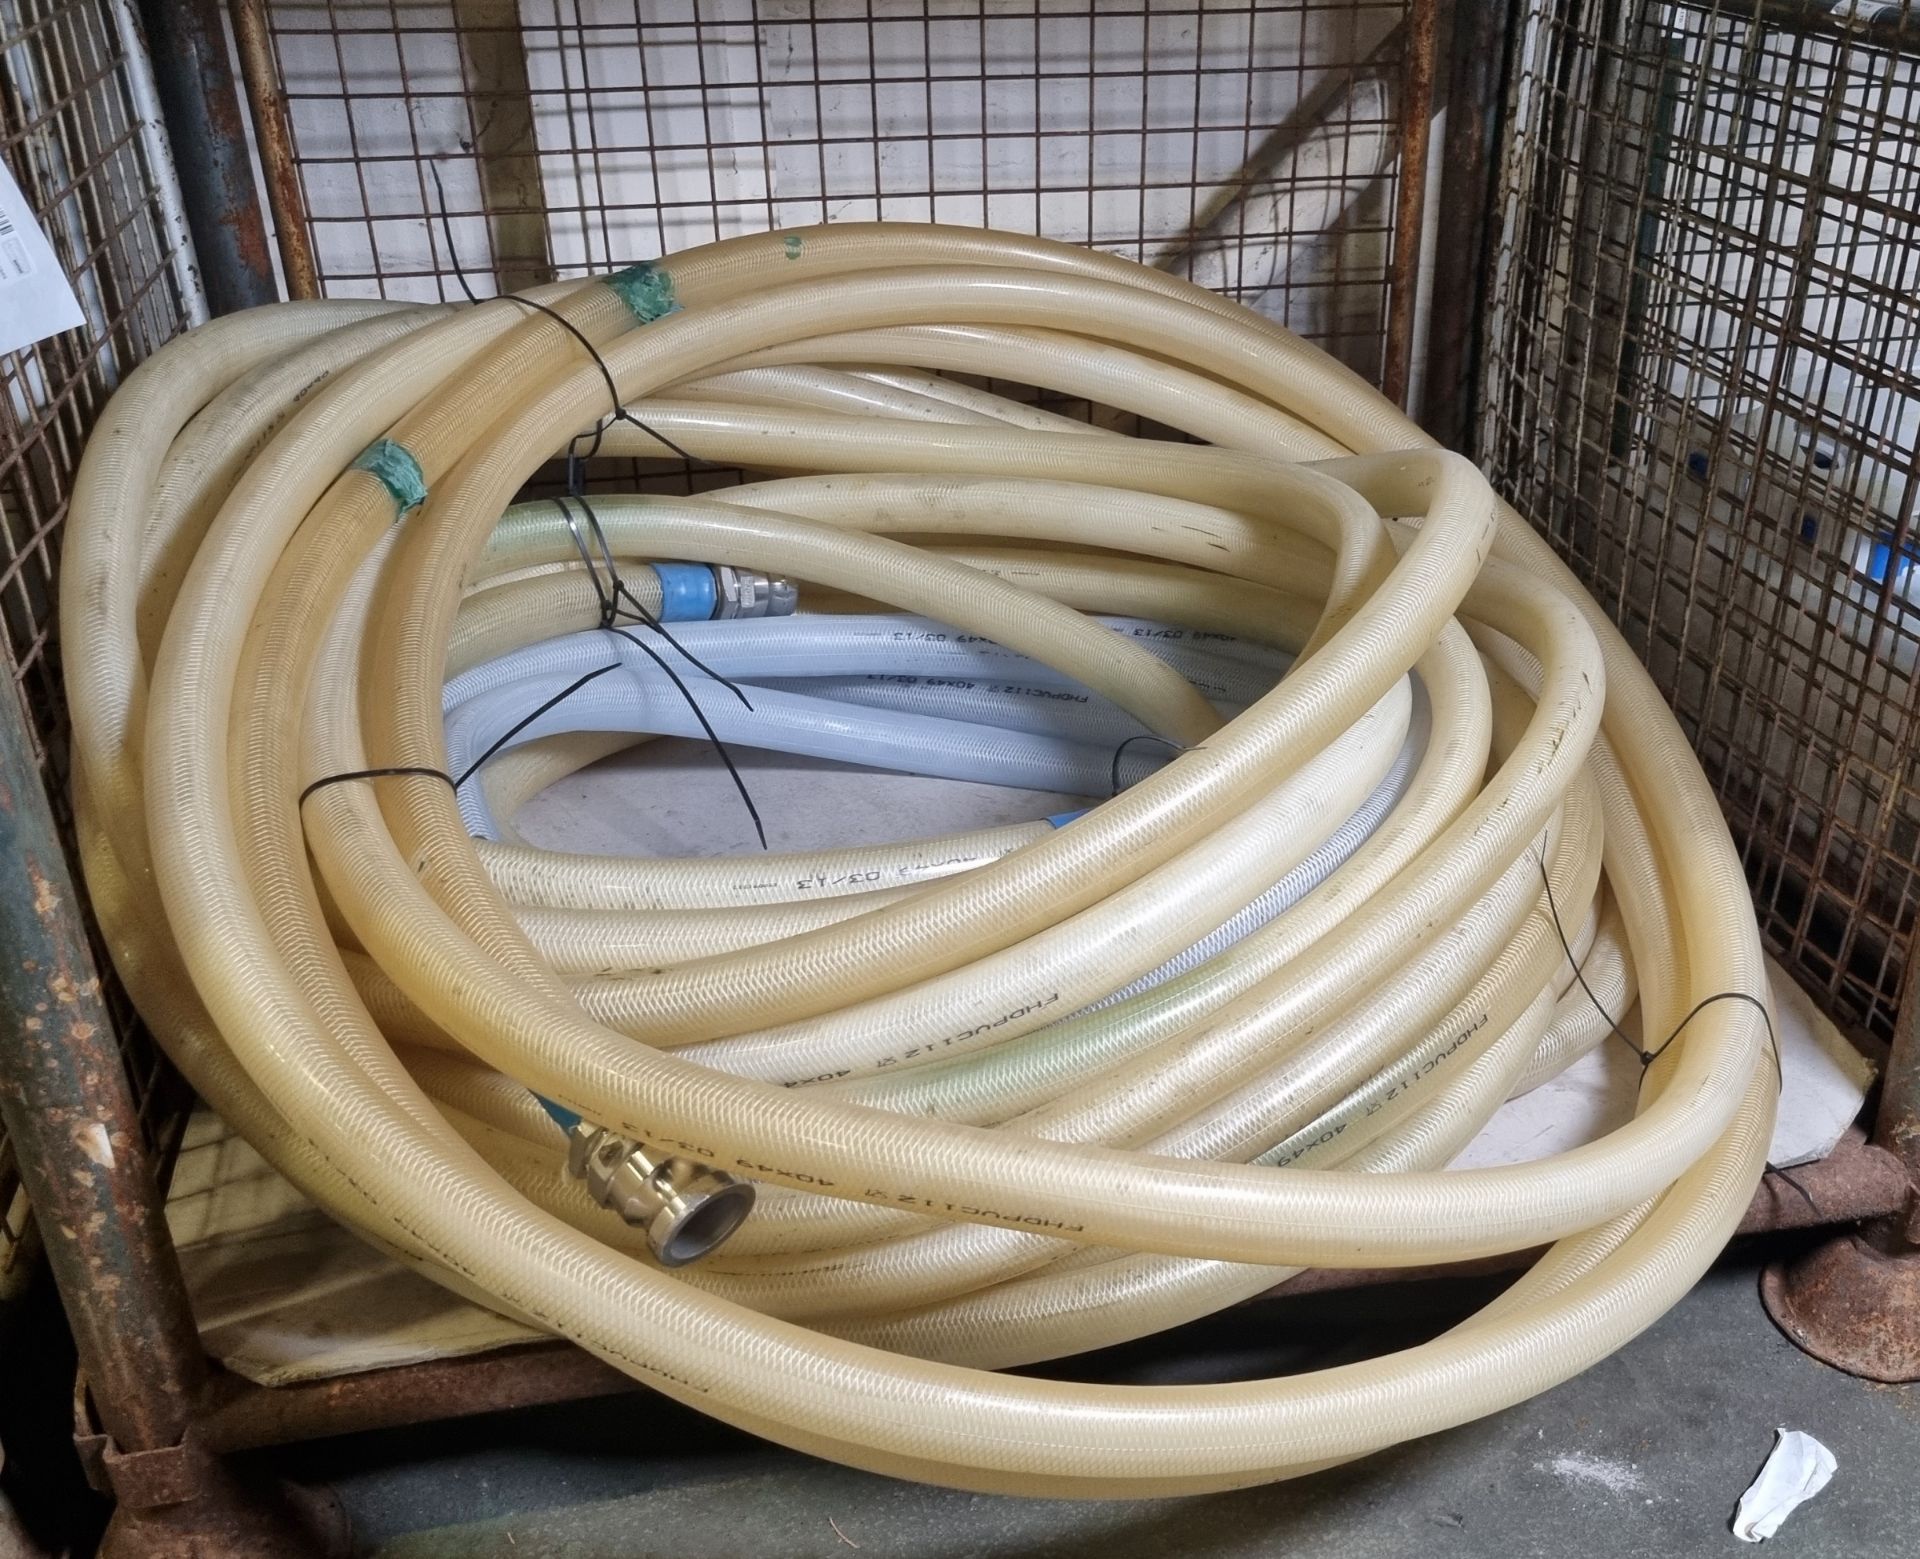 4x Flexible heavy duty hoses with couplings - Unknown length - Image 2 of 3